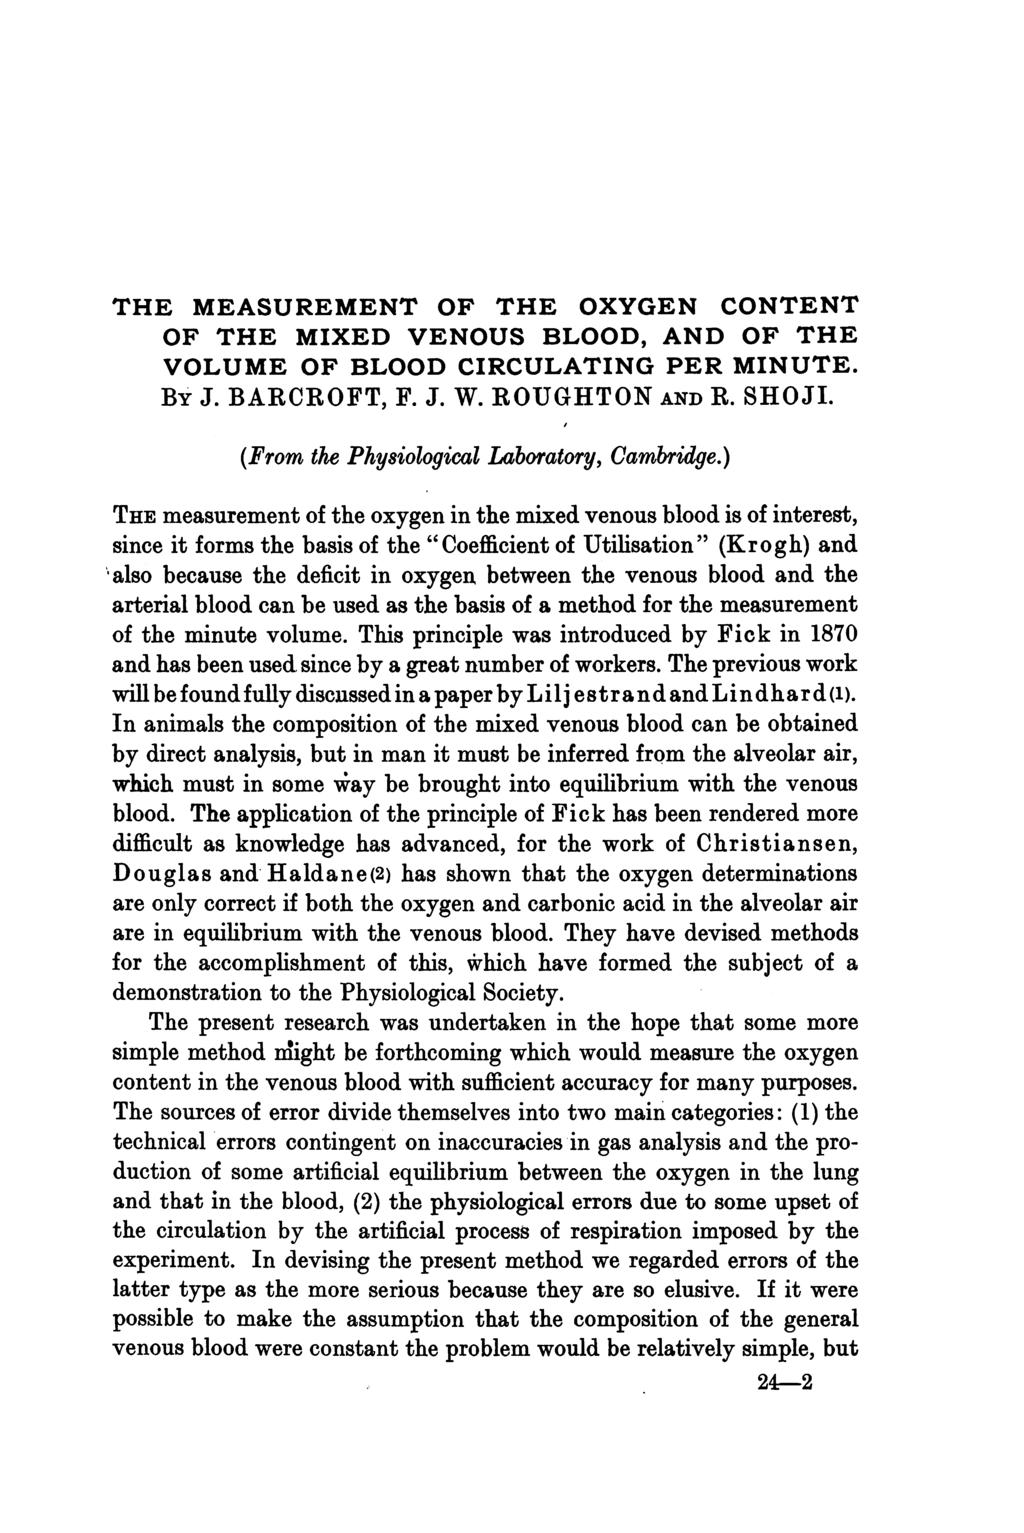 THE MEASUREMENT OF THE OXYGEN CONTENT OF THE MIXED VENOUS BLOOD, AND OF THE VOLUME OF BLOOD CIRCULATING PER MINUTE. BY J. BARCROFT, F. J. W. ROUGHTON AND R. SHOJI.